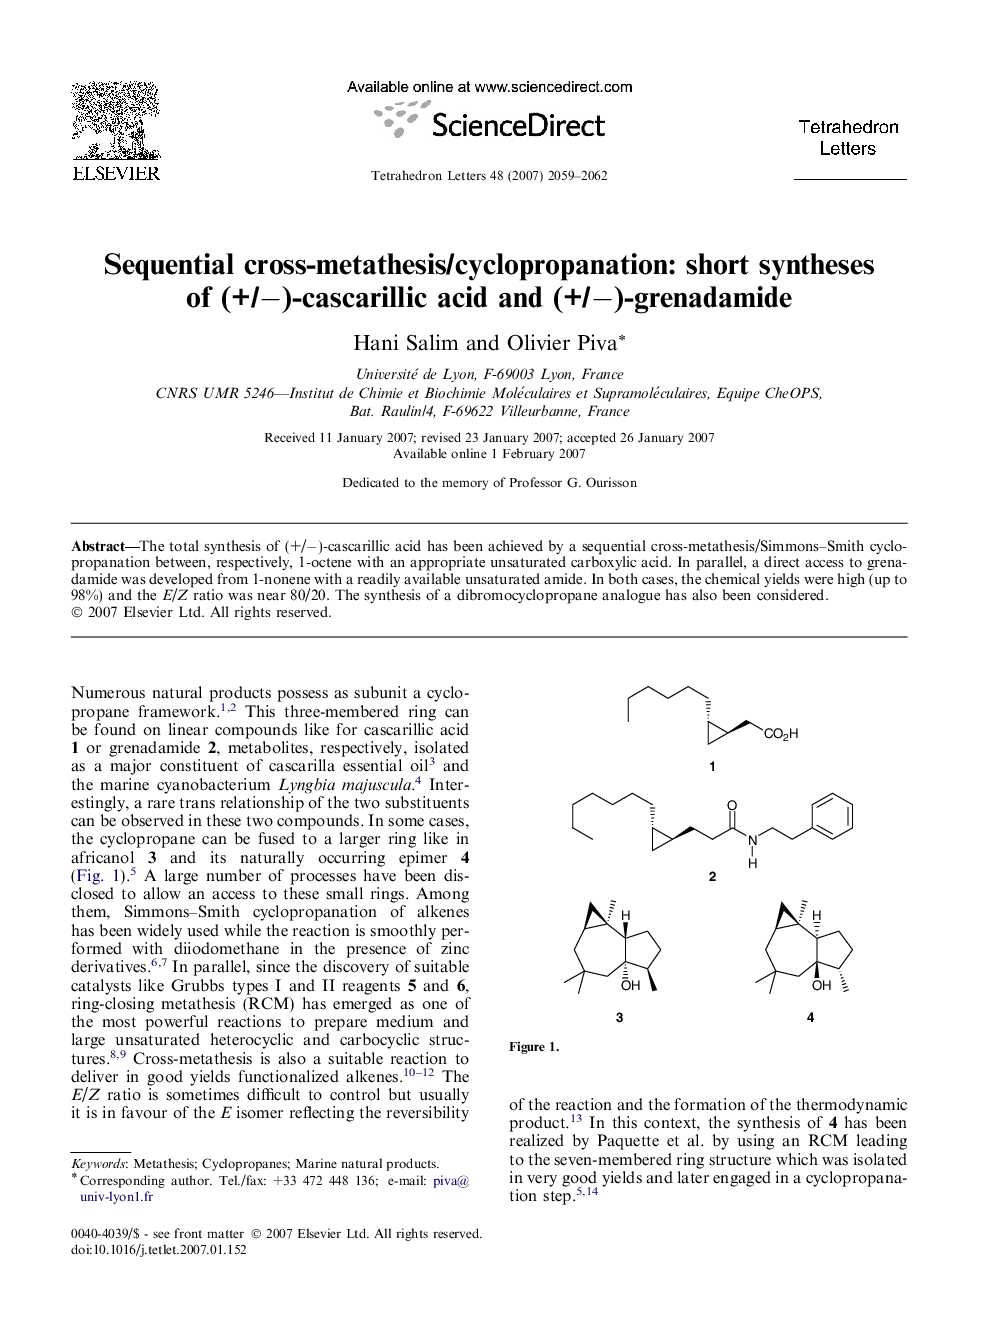 Sequential cross-metathesis/cyclopropanation: short syntheses of (+/â)-cascarillic acid and (+/â)-grenadamide